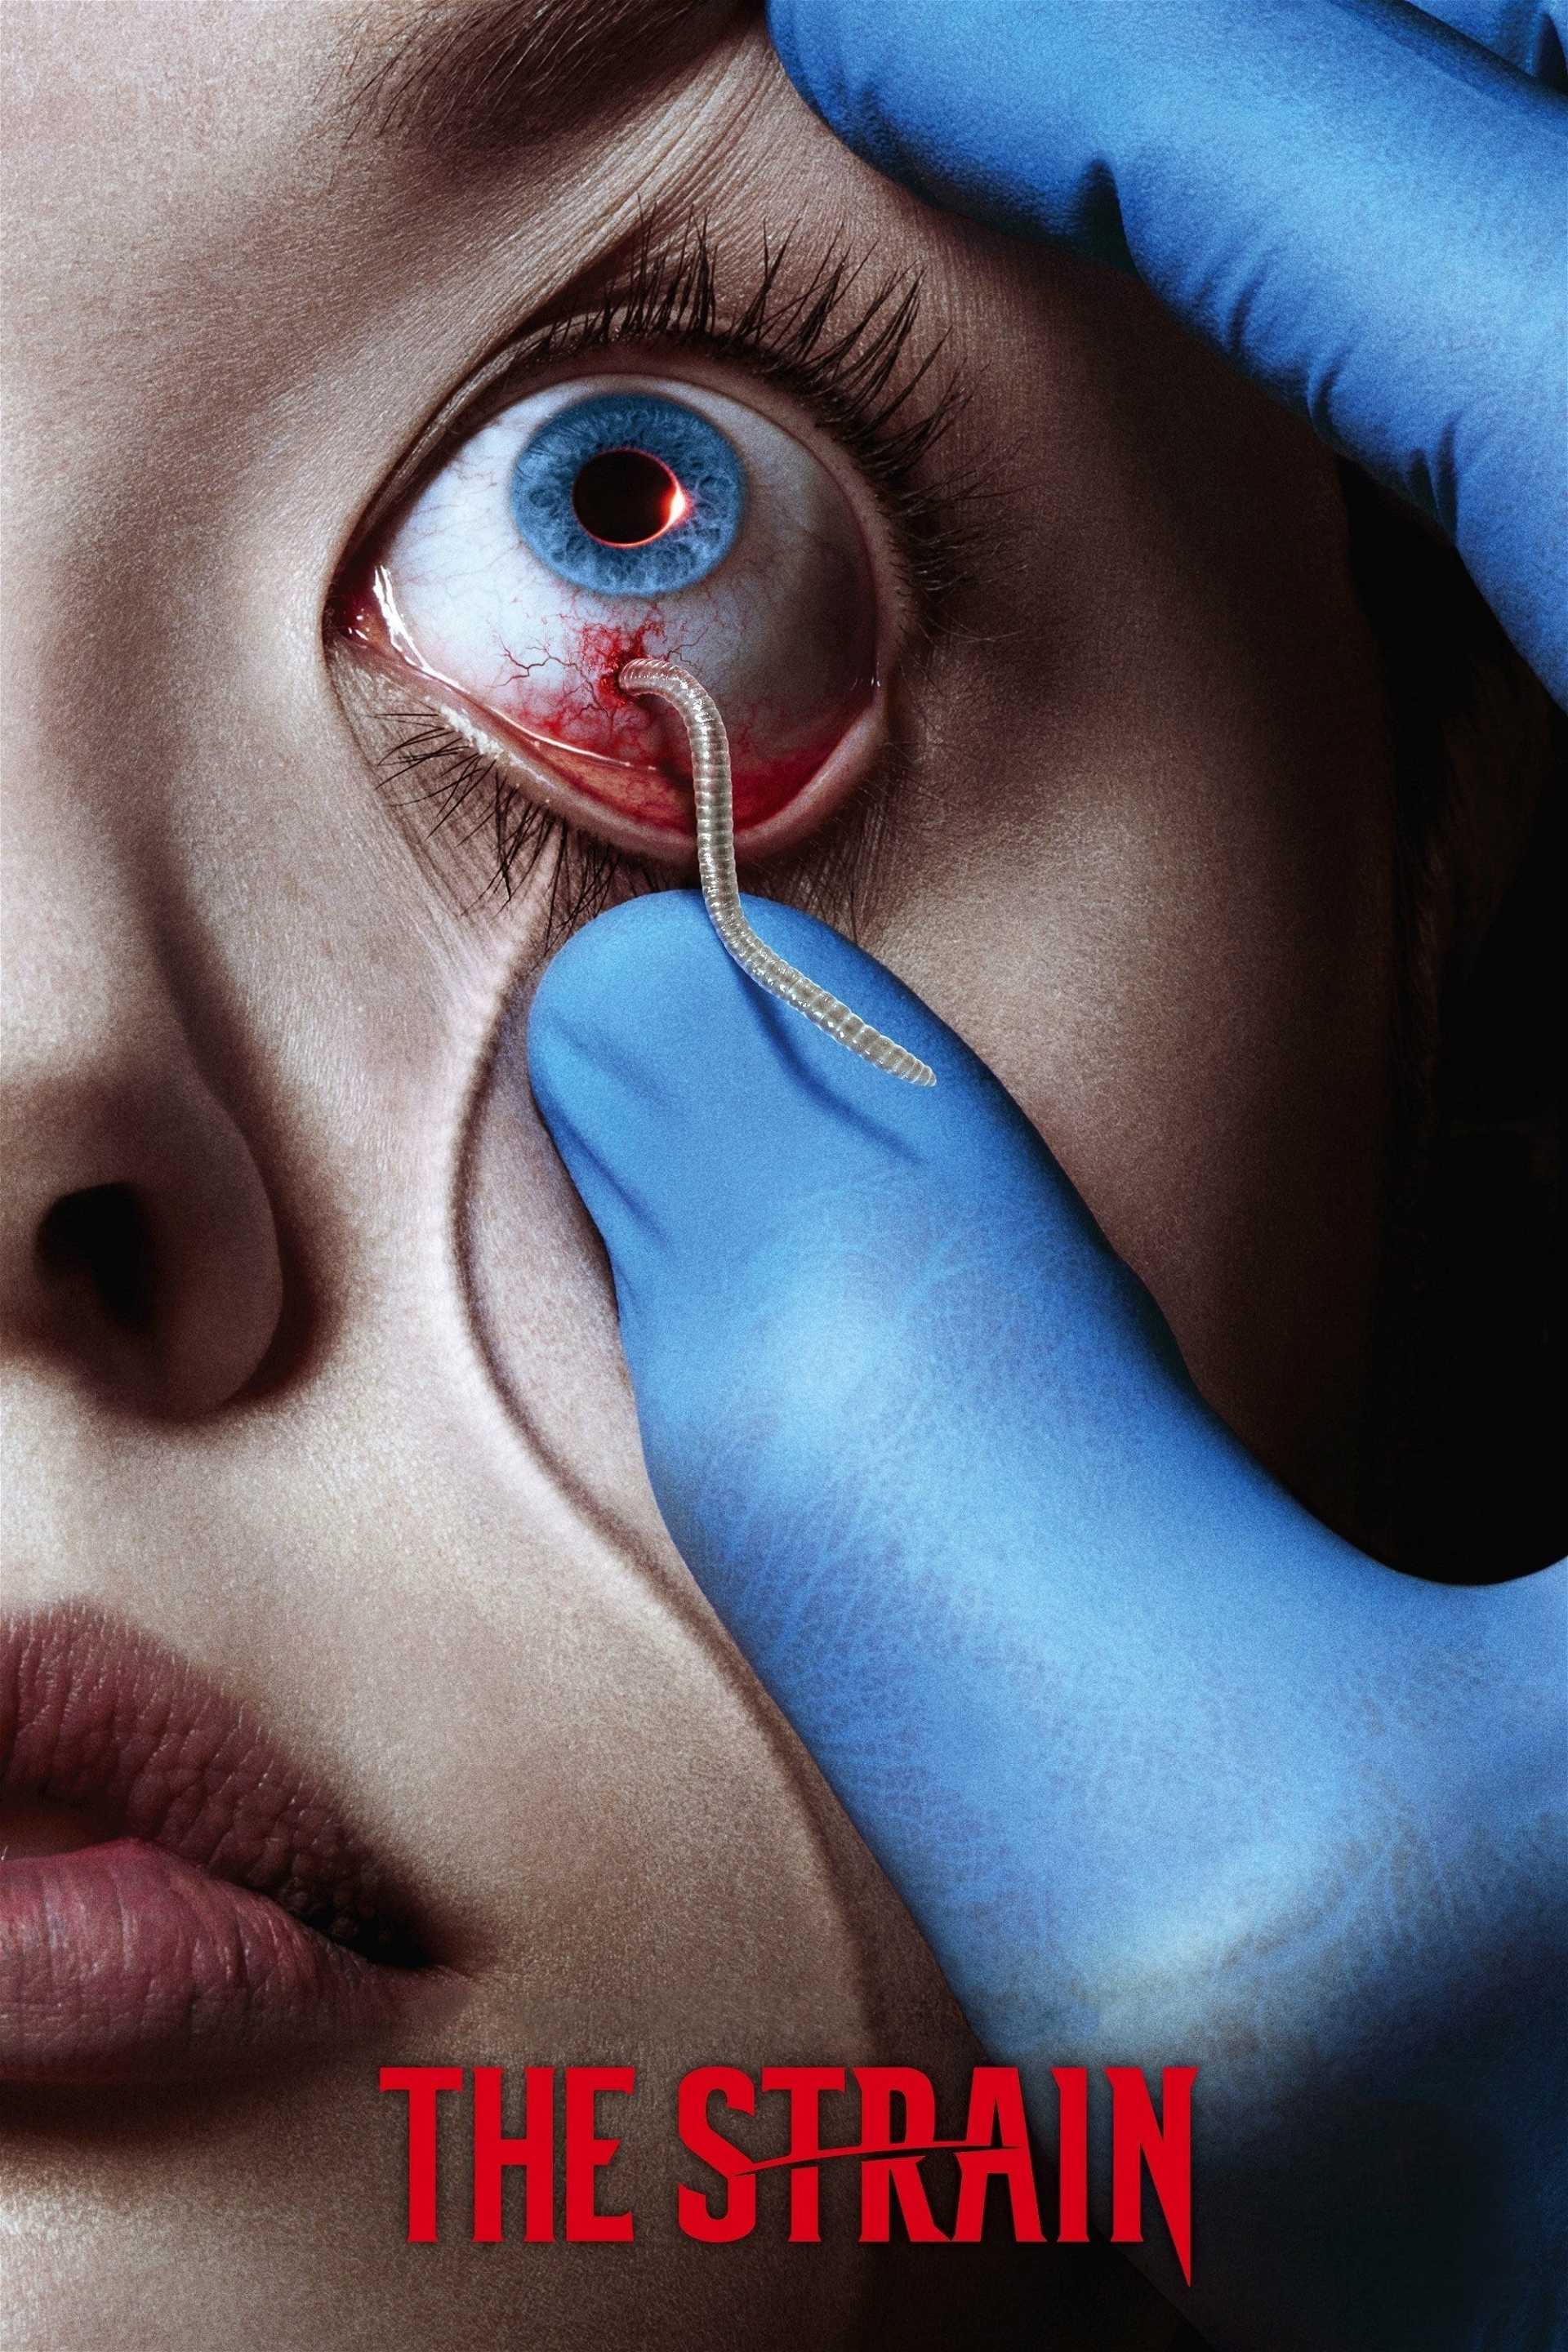 The Strain in streaming